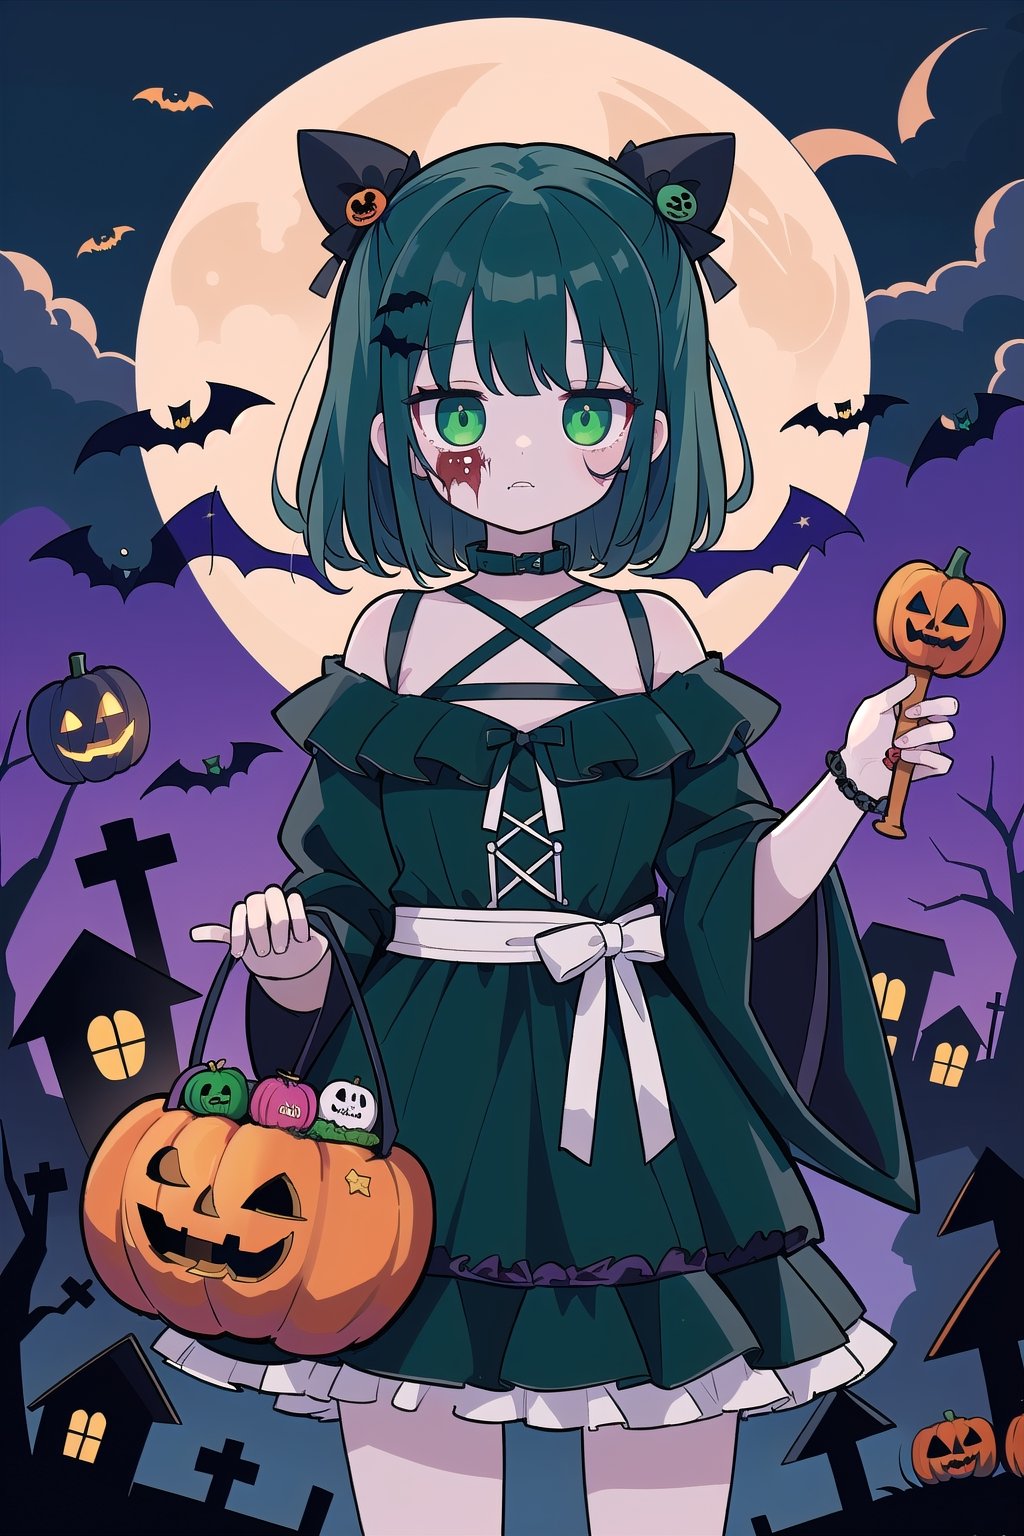 (masterpiece, best quality, highres:1.1), ultra resolution image, (zombie_girl, rotten_green_skin):1.2, holding a basket full of sweets,  night, moon, jack-o-lantern, halloween parade scape